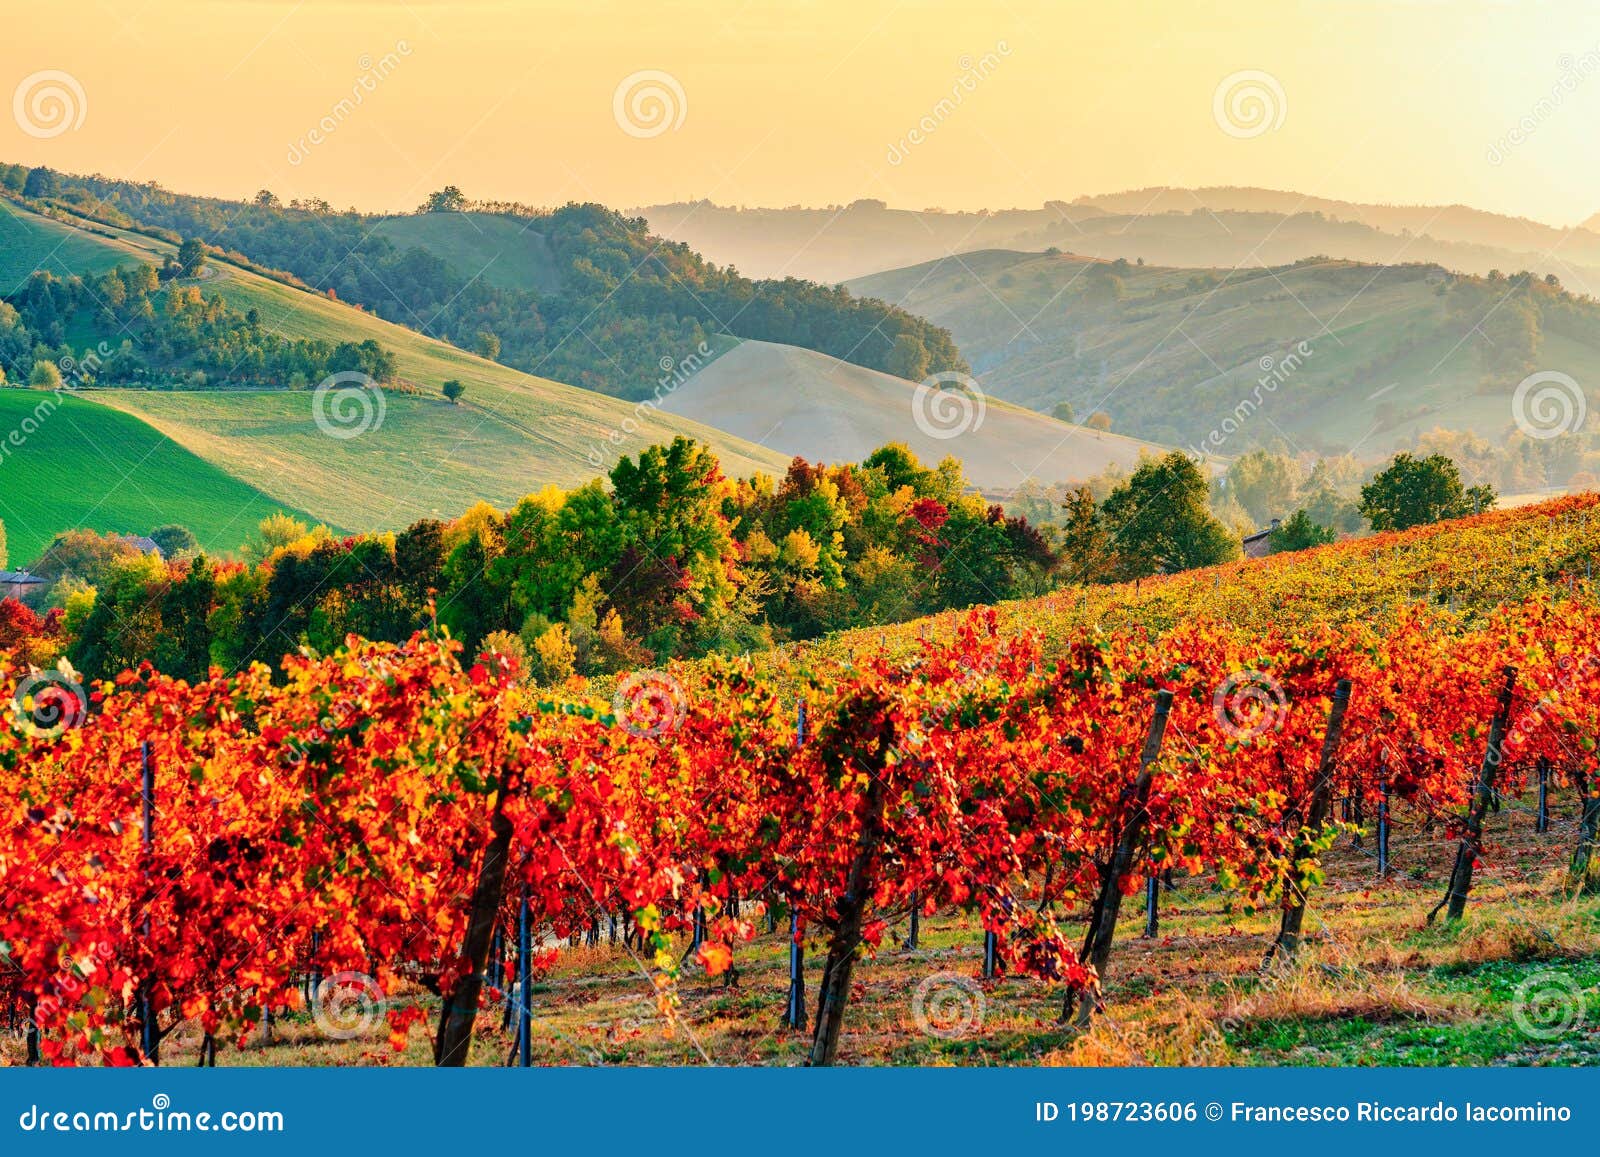 autumn landscape, vineyards and hills at sunset. modena, italy